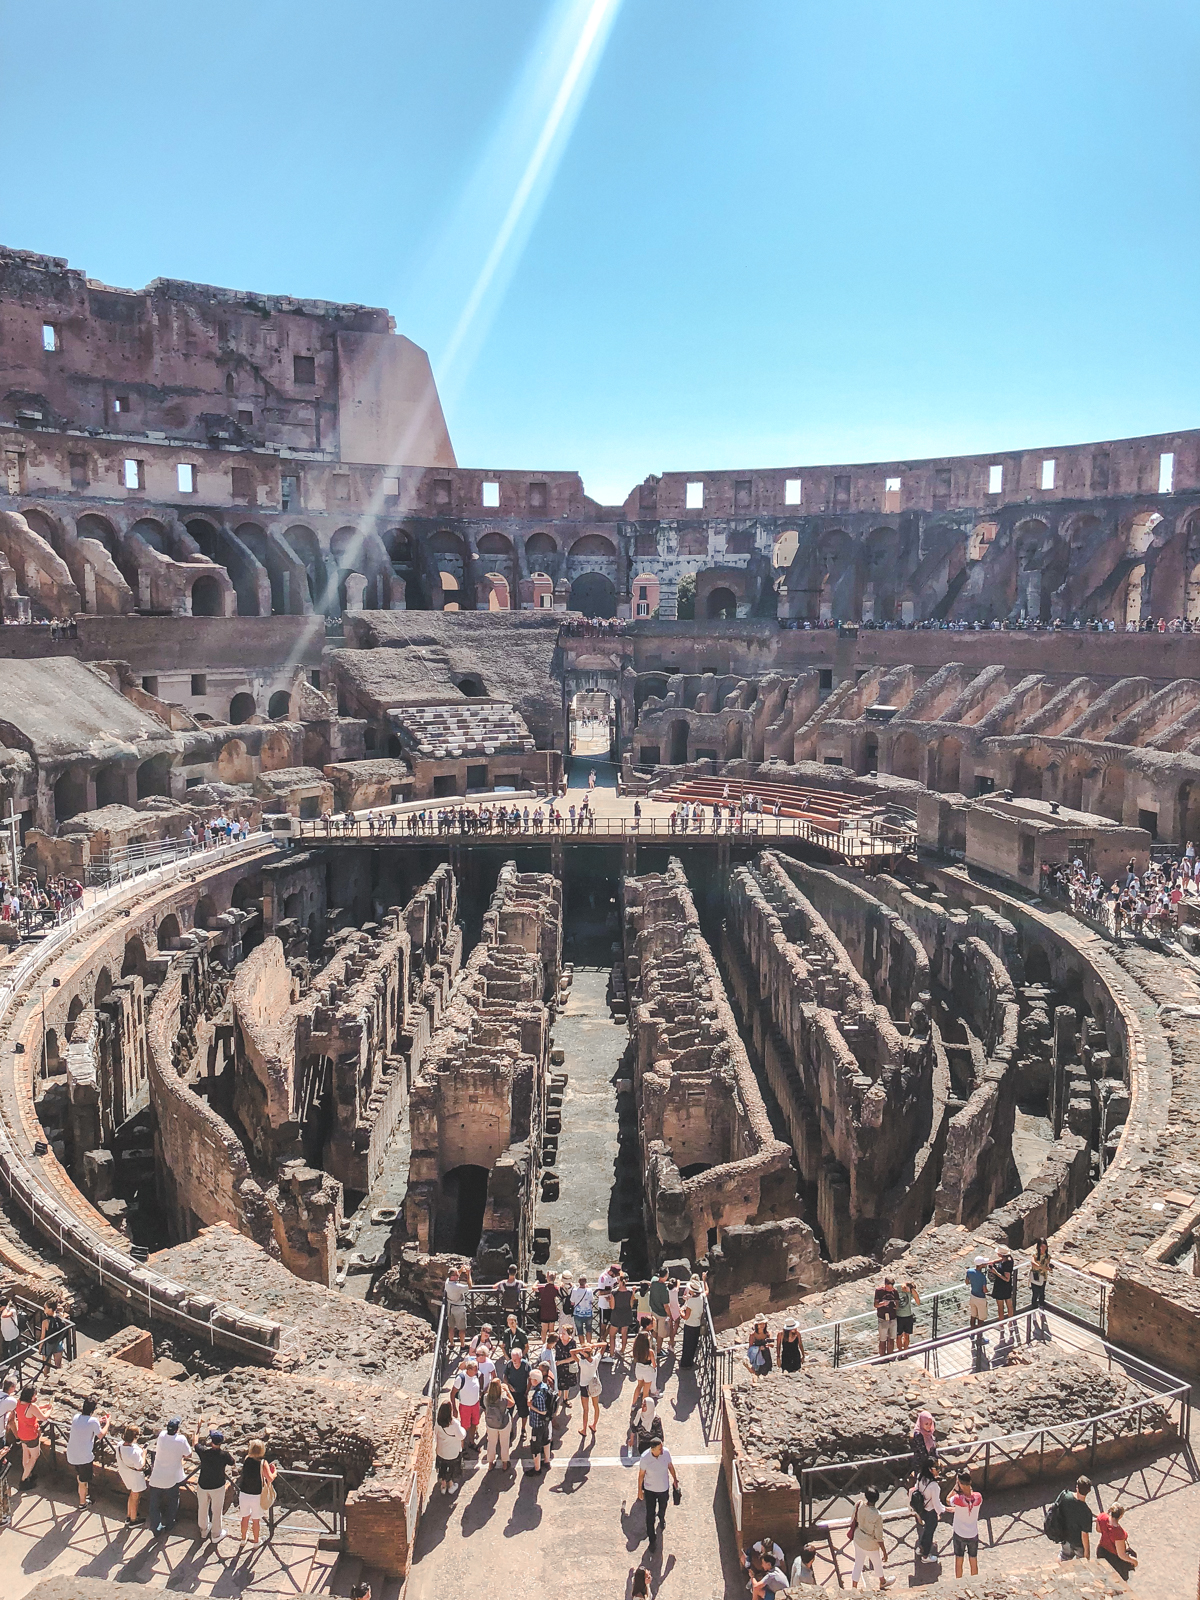 wide shot showing the inside of the Colosseum